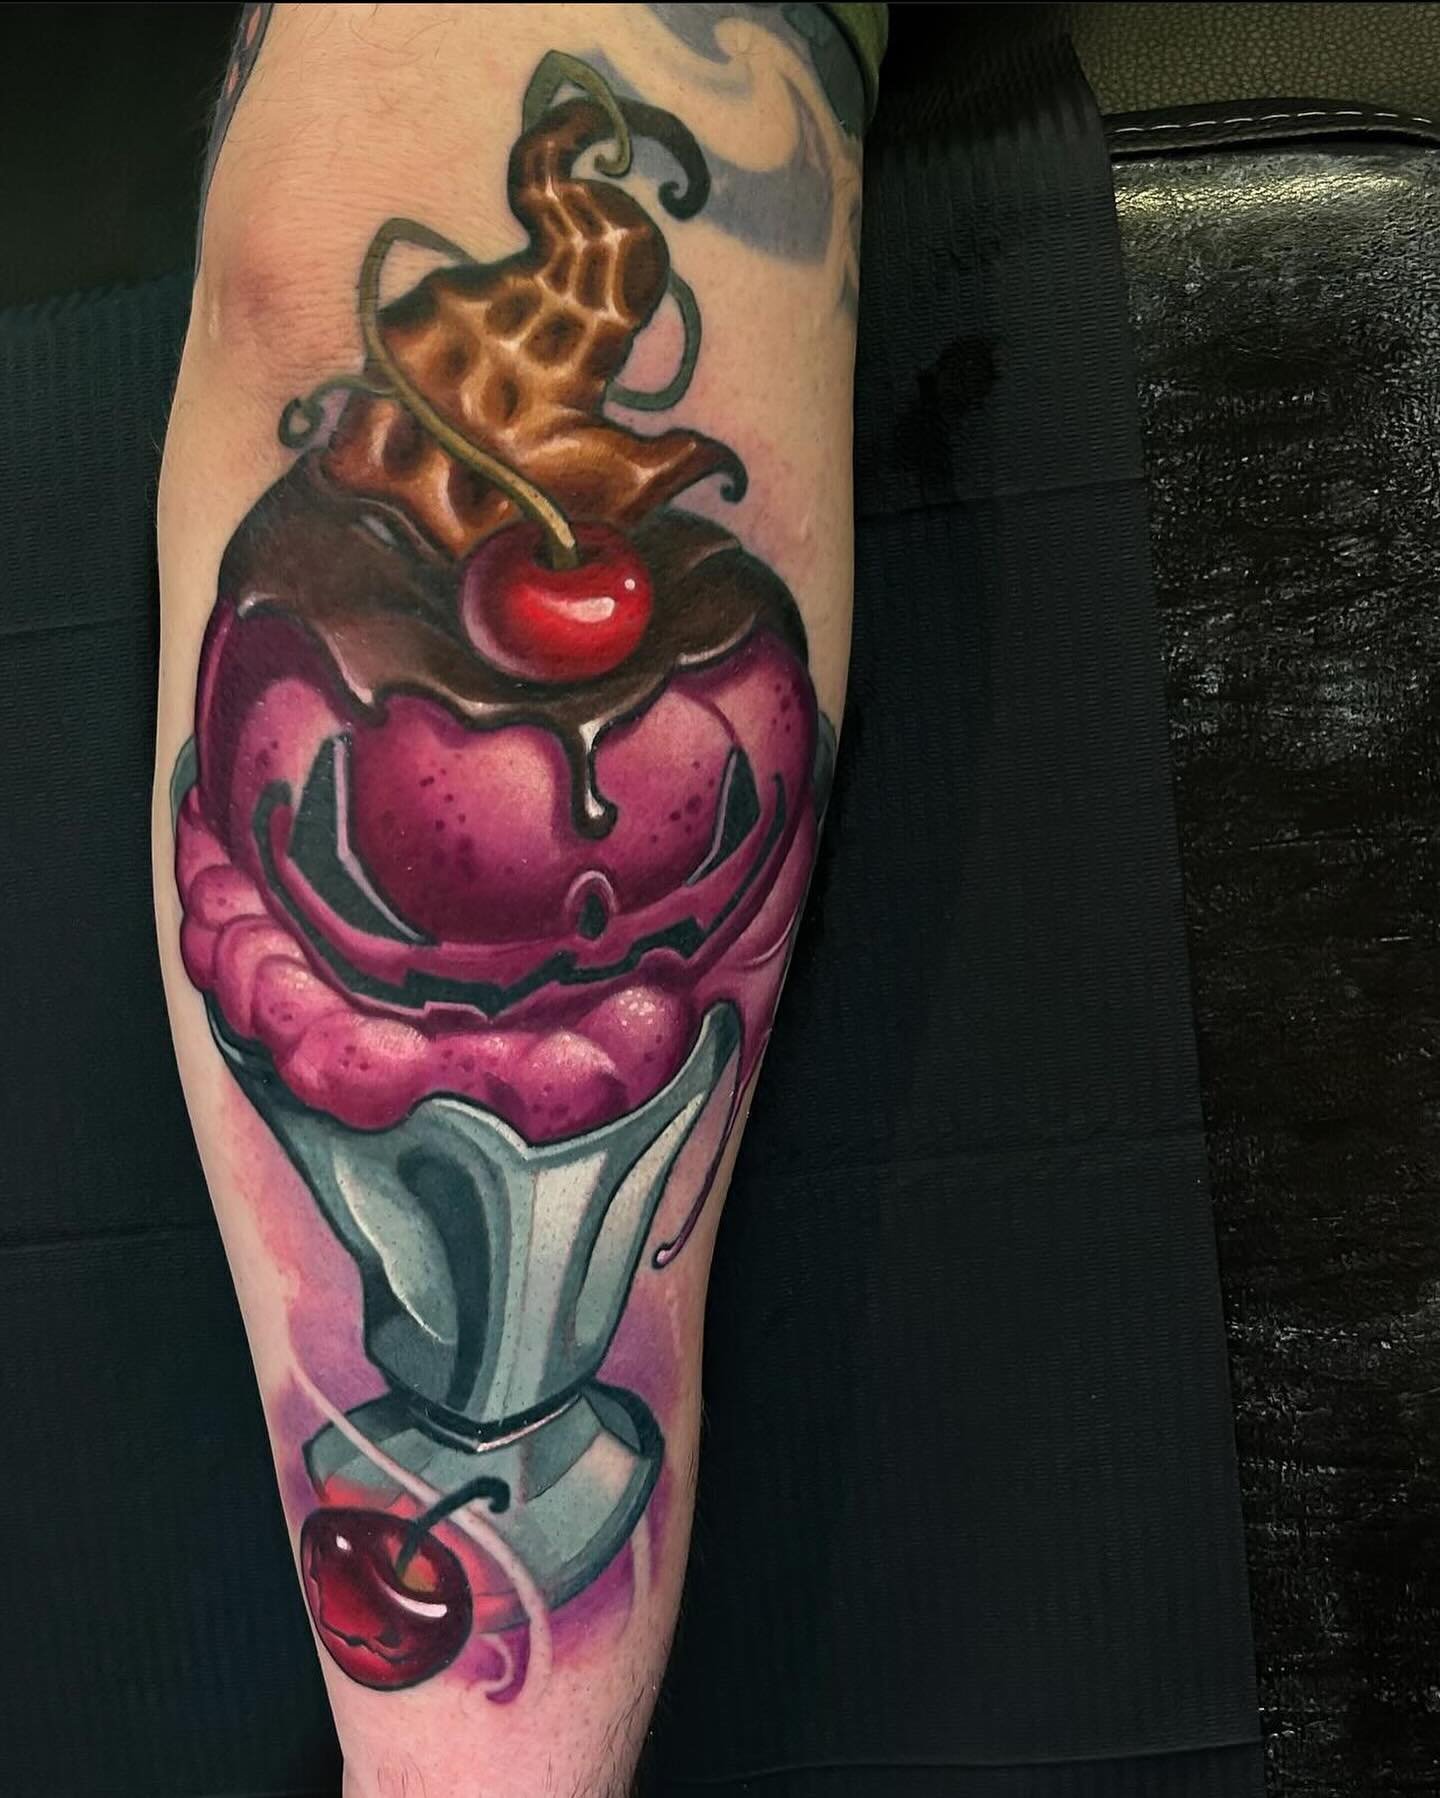 This ice cream tattoo was done by resident artist @timmy_b_413 of @niteowltattoomass 🍦🍦🍦🍒🍒🍒
➕➕➕➕➕➕➕➕➕➕➕

NiteOwl Tattoo Mass 🦉🦉🦉
6 Service Center Rd
Northampton MA 01060
WALK-INS Always welcome!!!! NO PIERCINGS!!! 
📞413-727-3760
➡️www.niteo